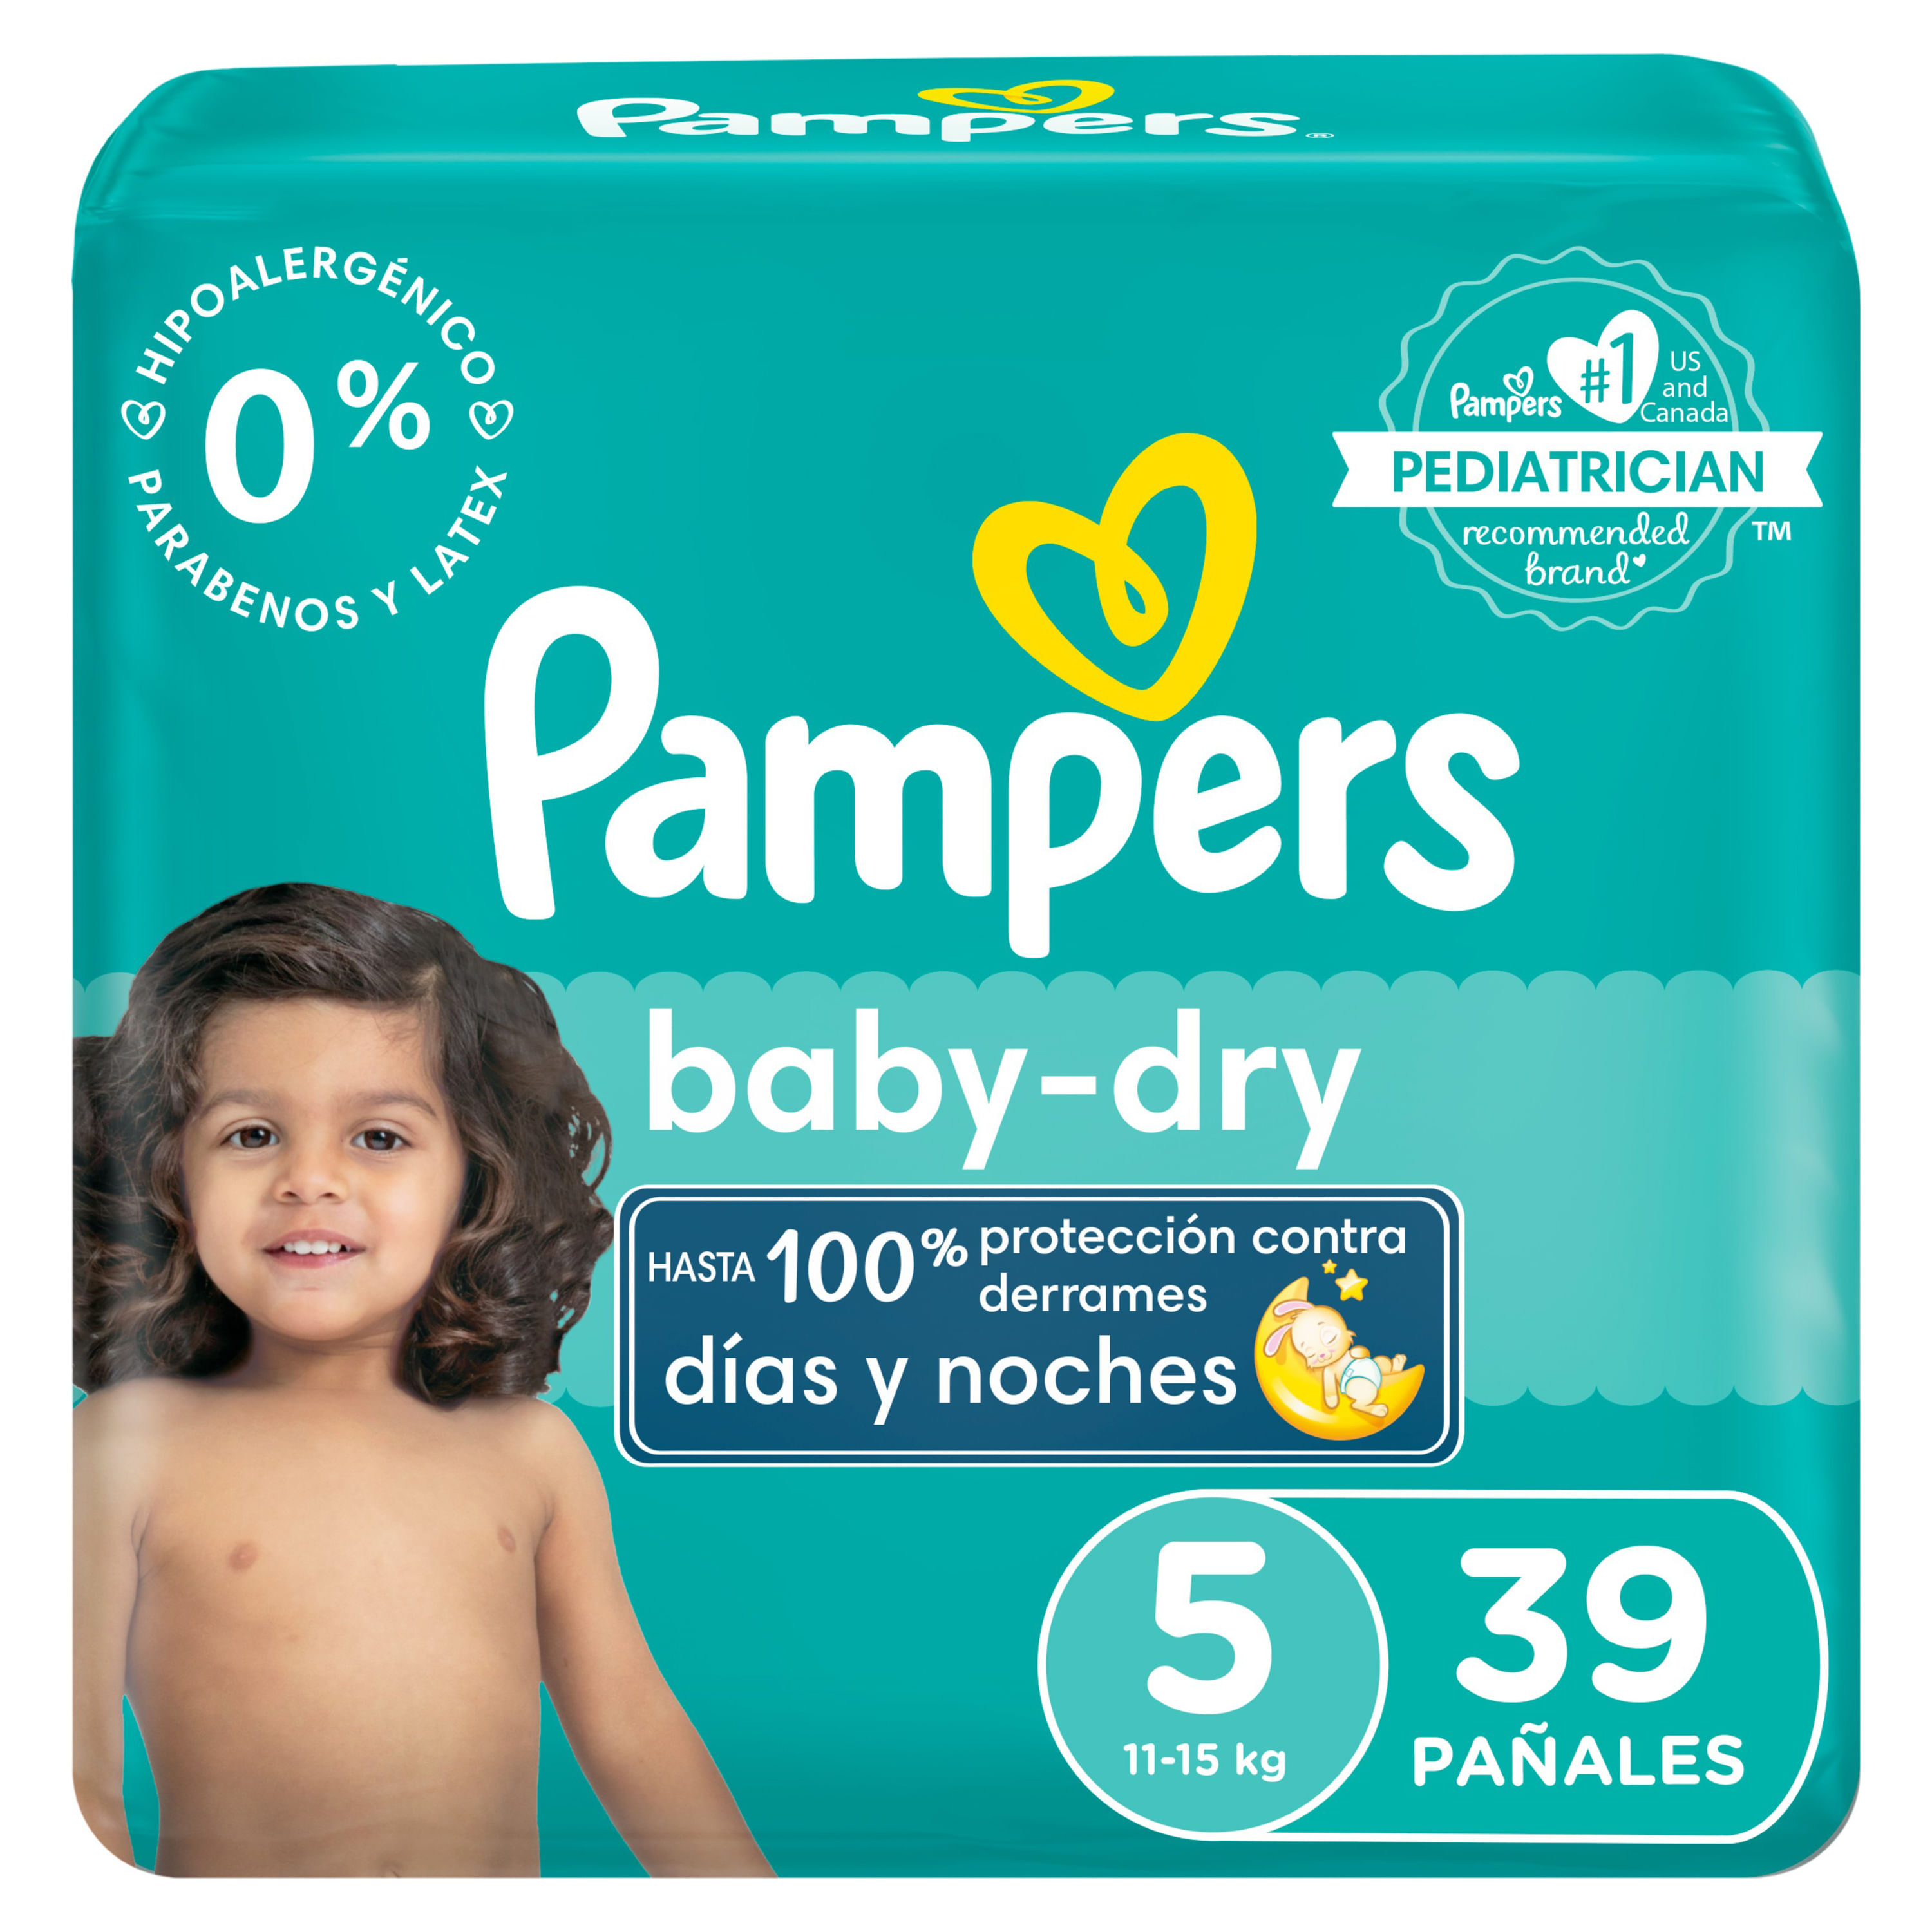 Pa-ales-Pampers-Baby-Dry-Talla-5-39-Unidades-1-5042